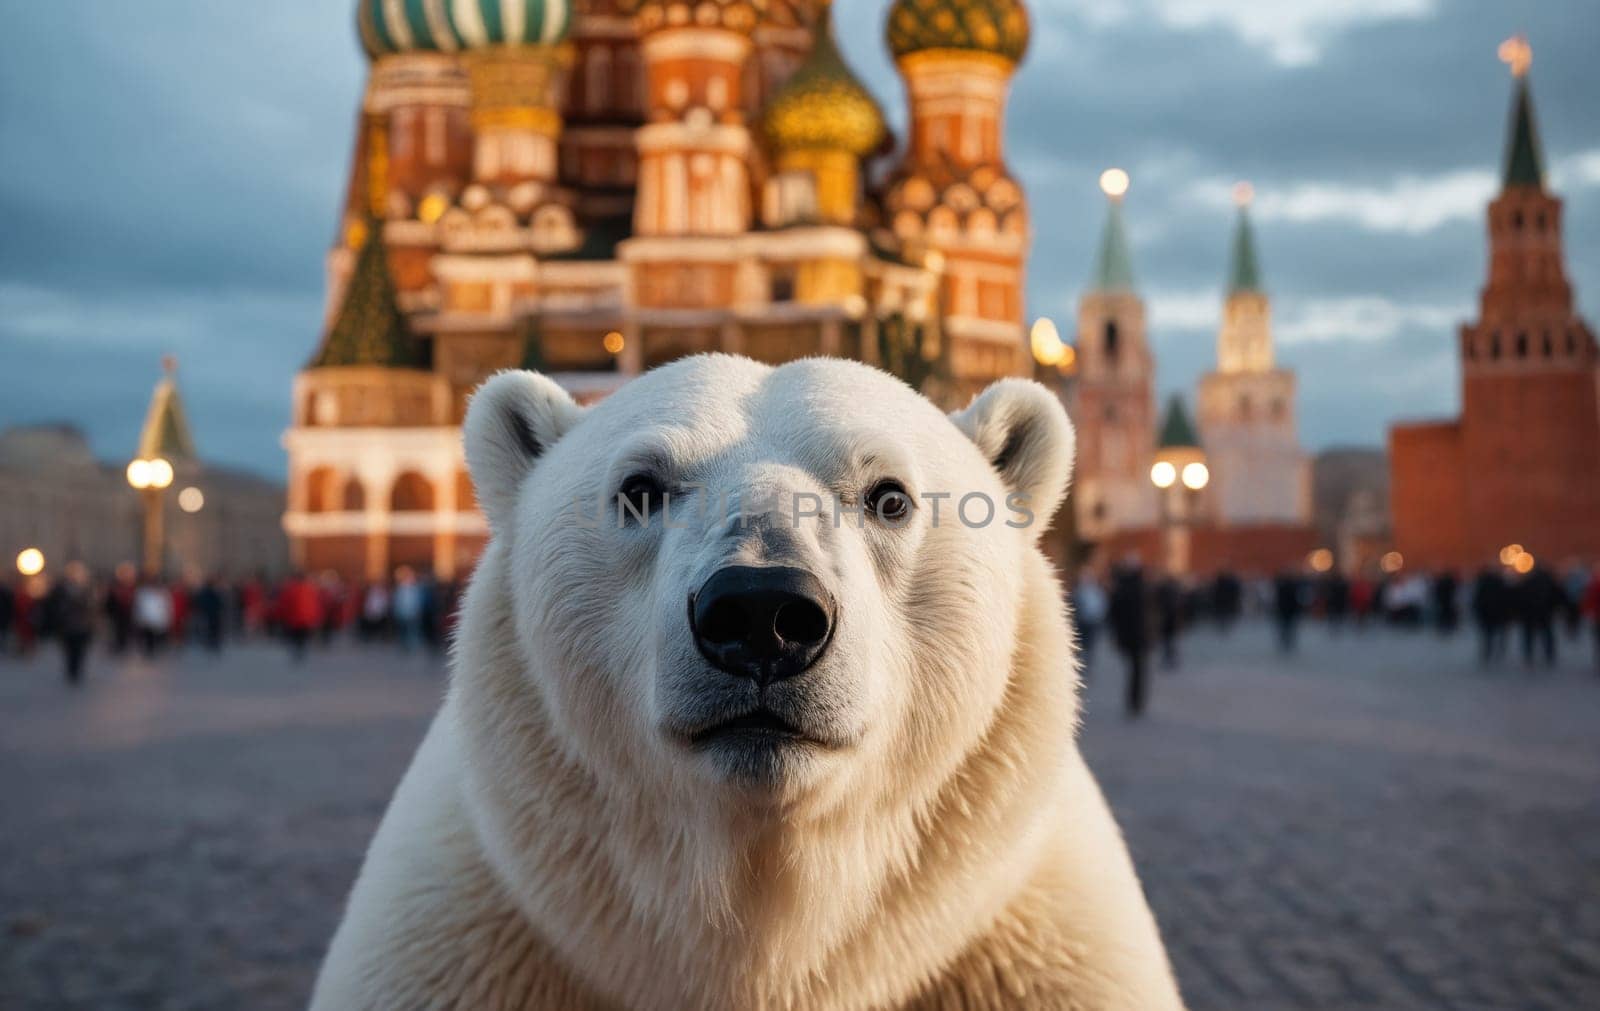 The Arctic Meets the Kremlin: Polar Bear at the Red Square by Andre1ns